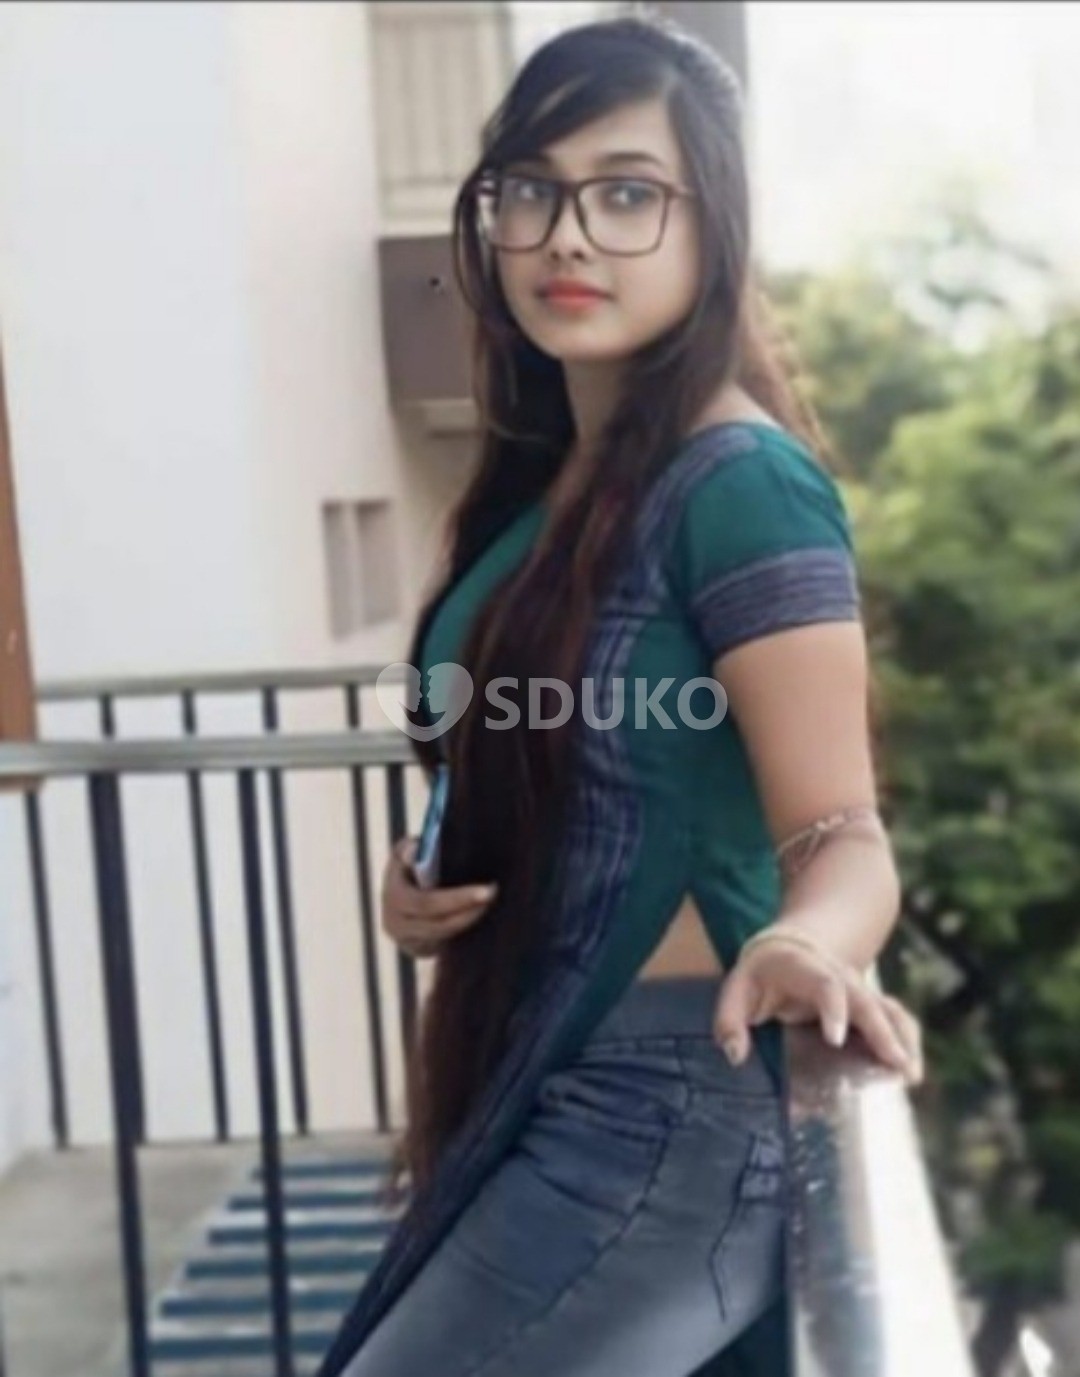 RED HILLS 💙🔥MY SELF DIVYA UNLIMITED SEX CUTE BEST SERVICE AND SAFE AND SECURE AND 24 HR AVAILABLE